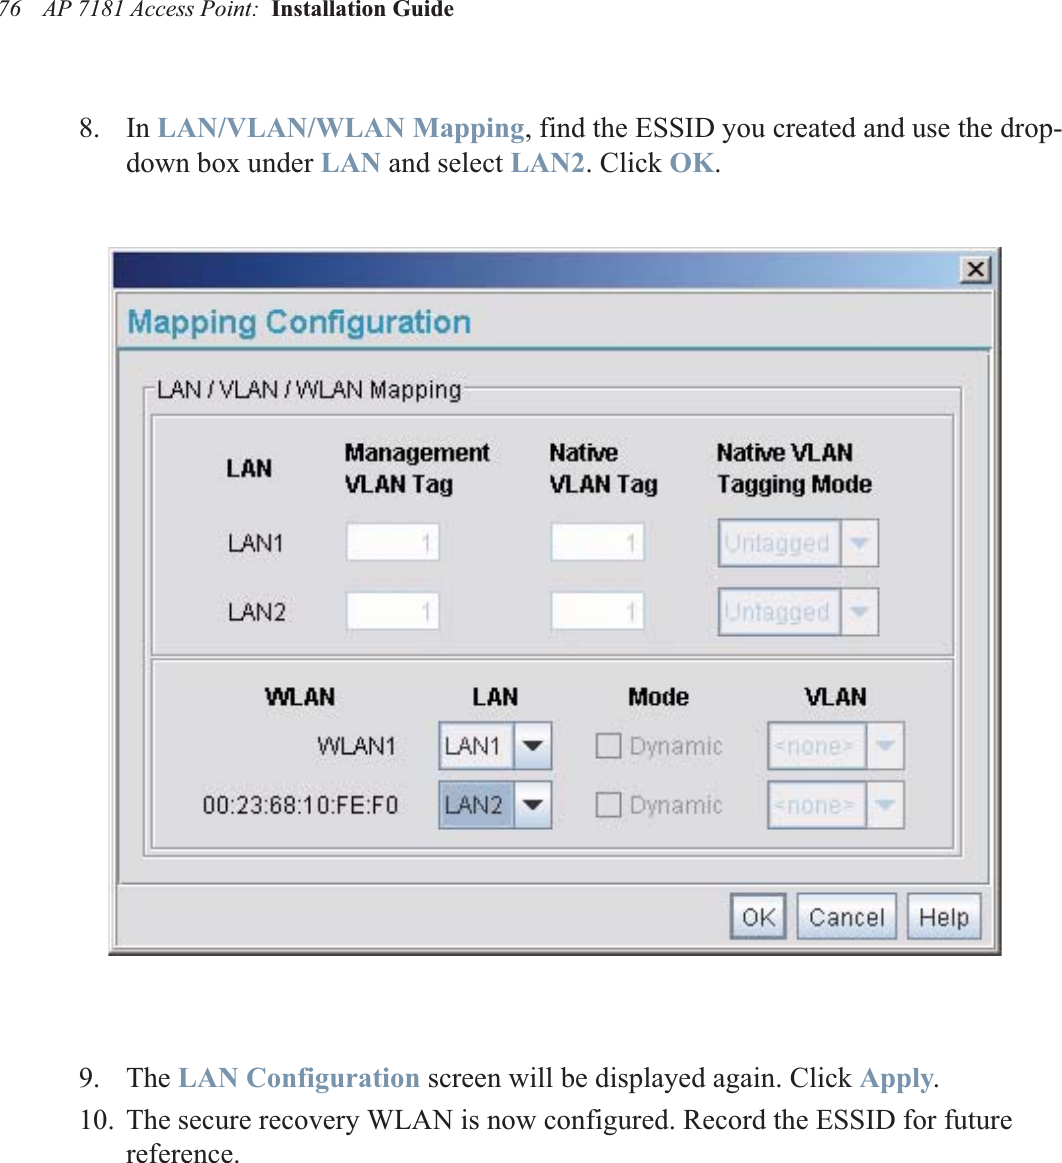 AP 7181 Access Point:  Installation Guide 768. In LAN/VLAN/WLAN Mapping, find the ESSID you created and use the drop-down box under LAN and select LAN2. Click OK.9. The LAN Configuration screen will be displayed again. Click Apply.10. The secure recovery WLAN is now configured. Record the ESSID for future reference.